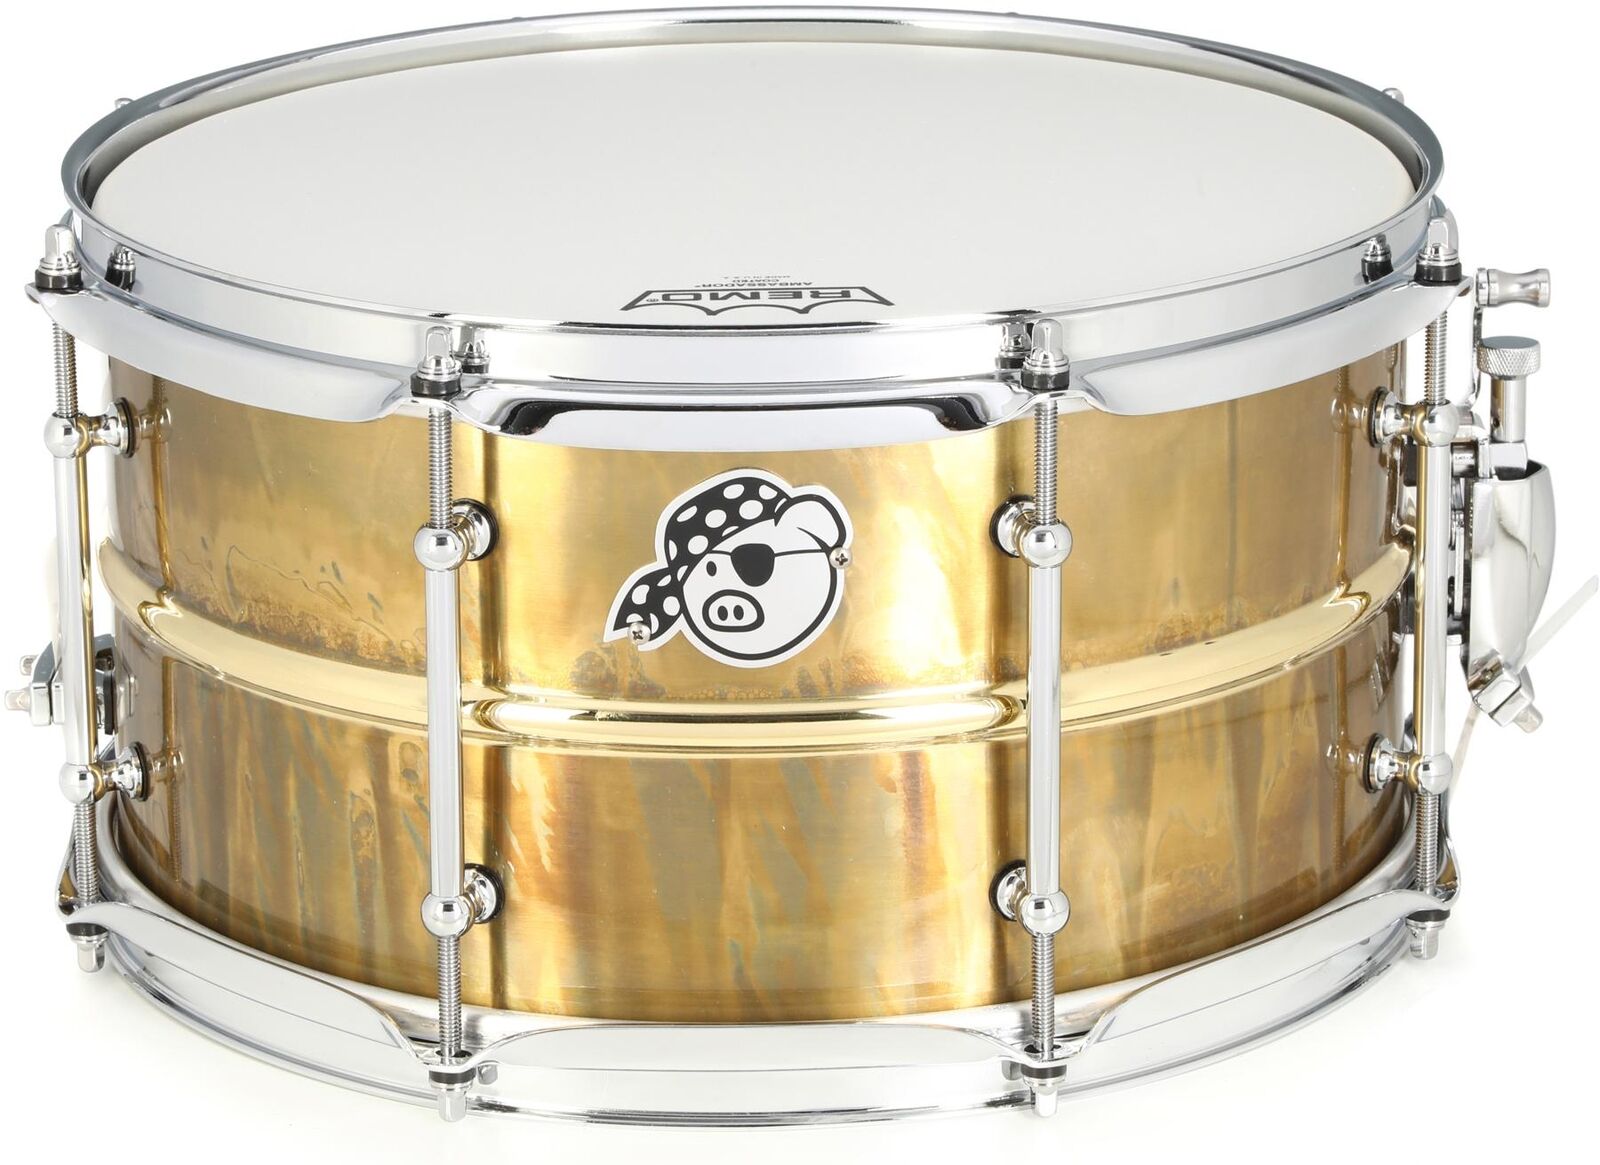 Pork Pie Percussion Brass Patina Snare Drum – 7 x 13 inch 1